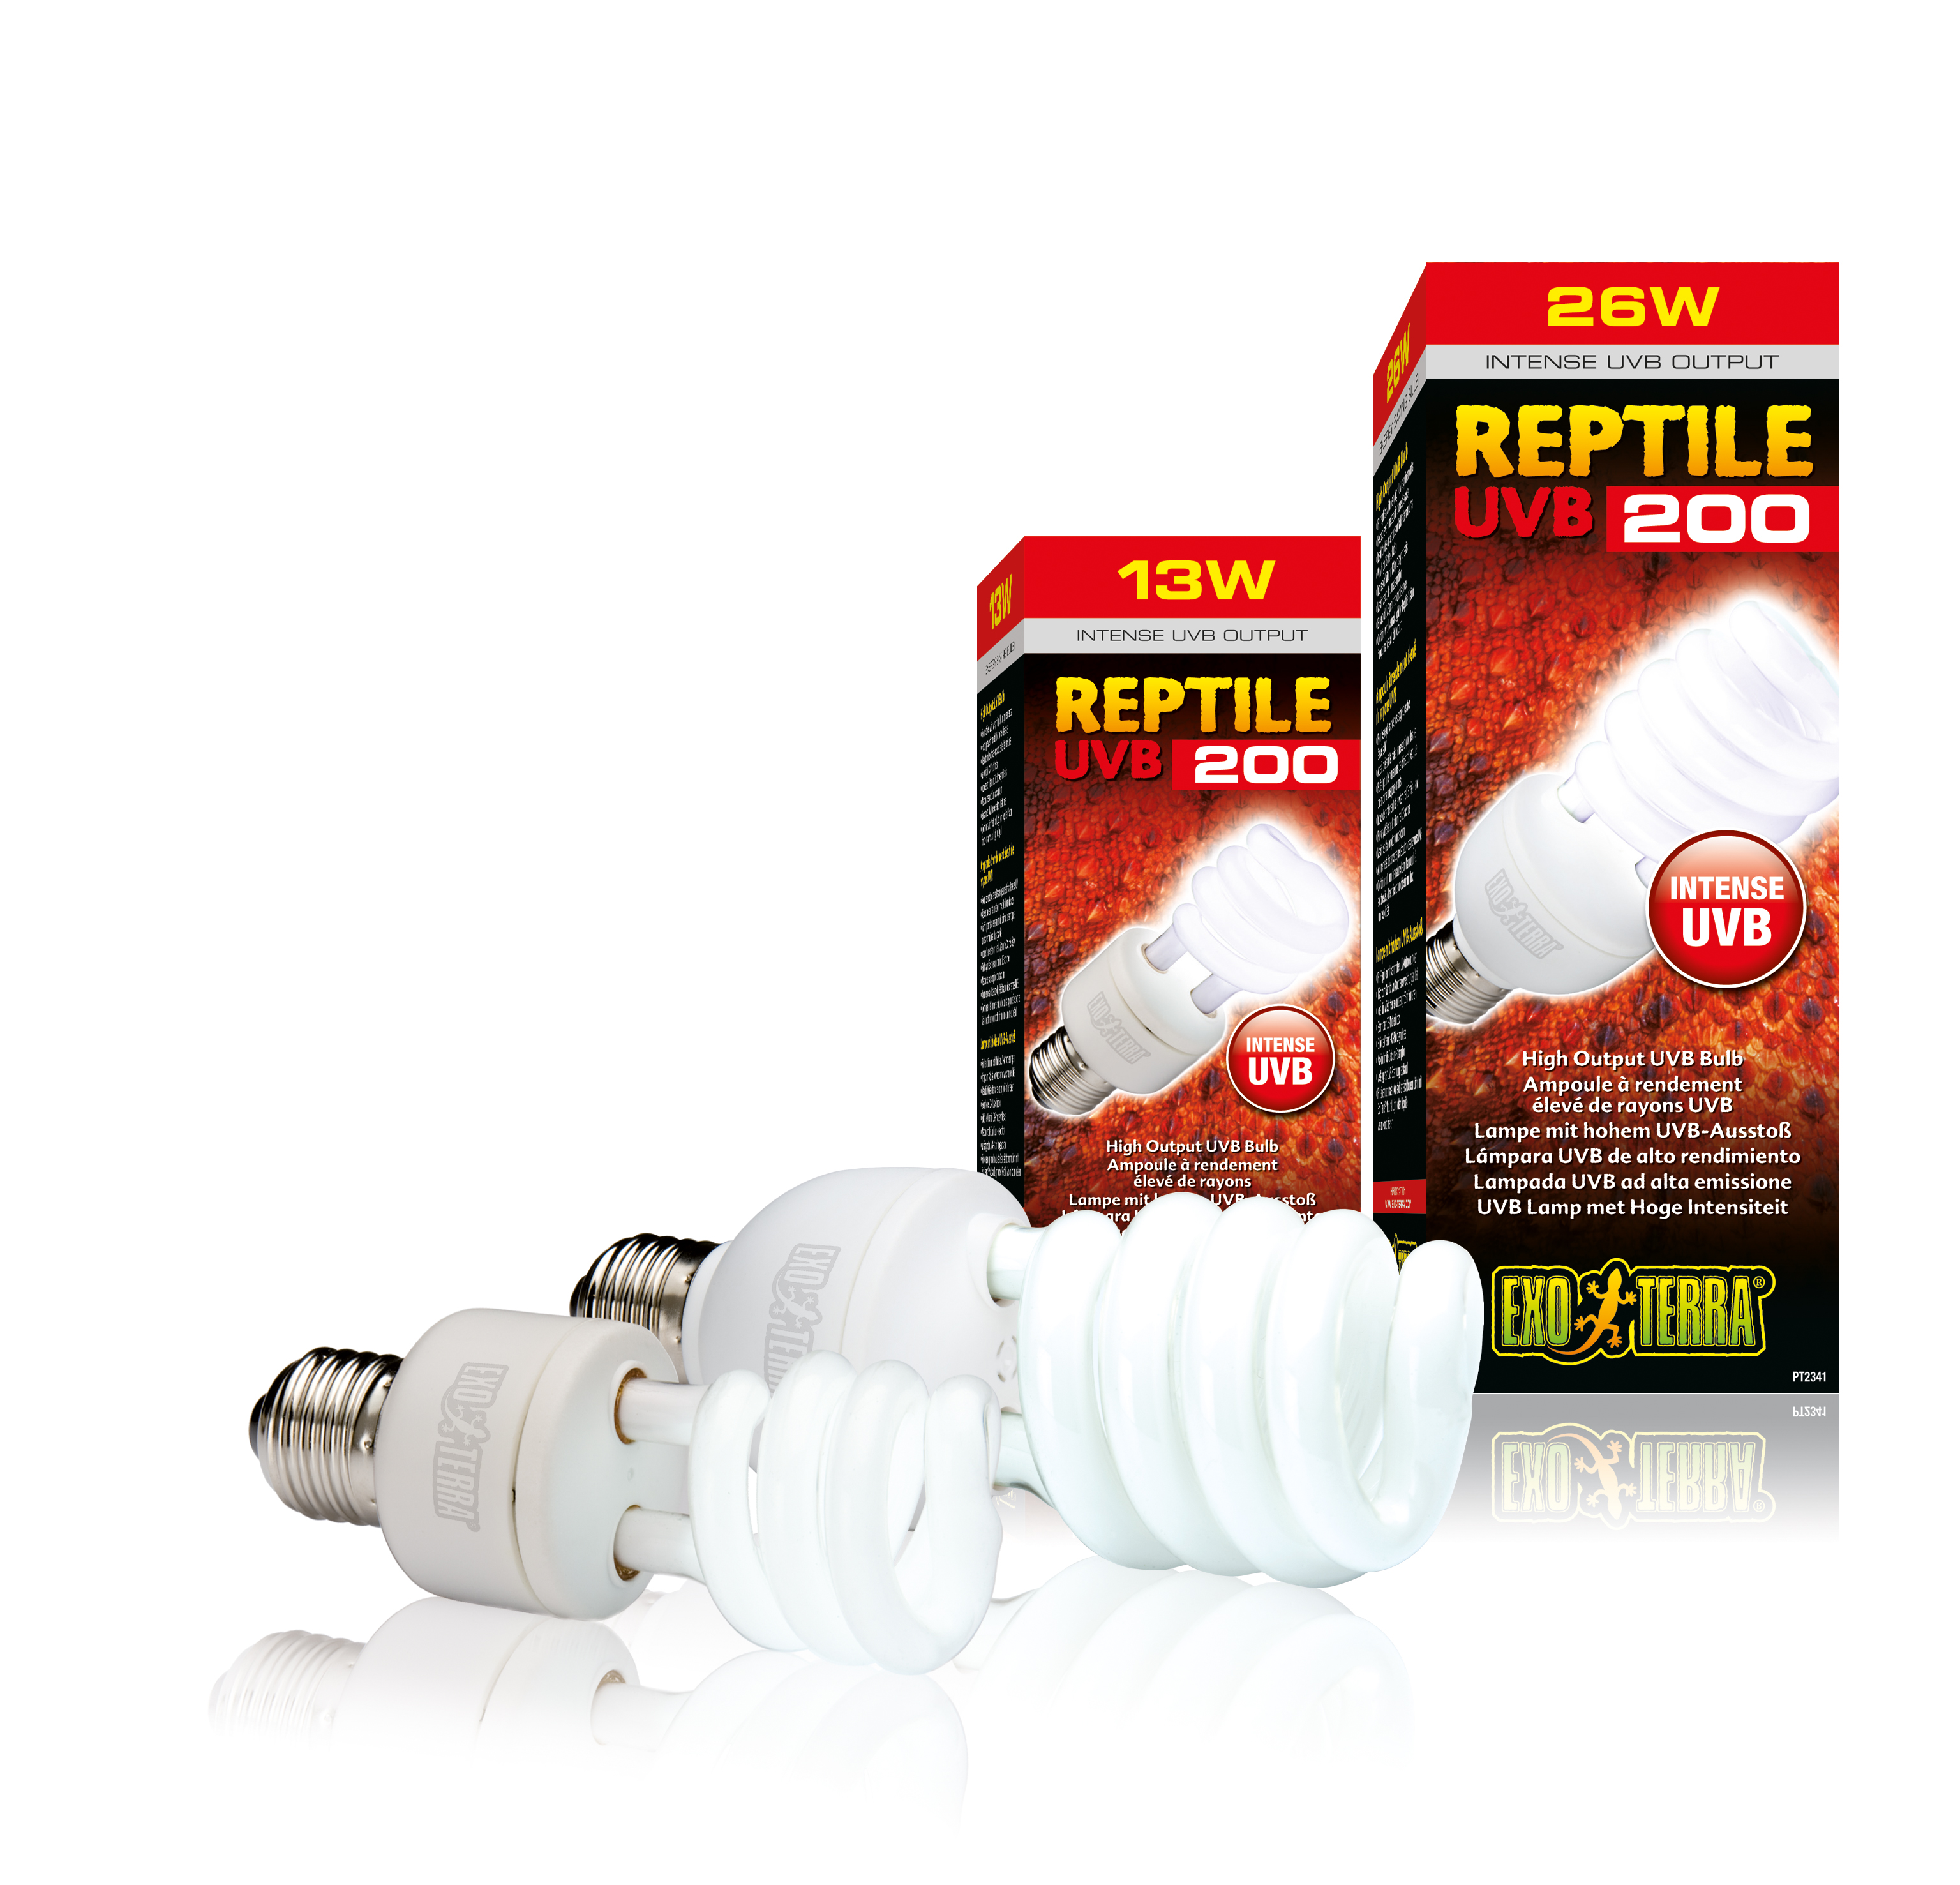 Ex reptile uvb200 compact lamp - <Product shot>